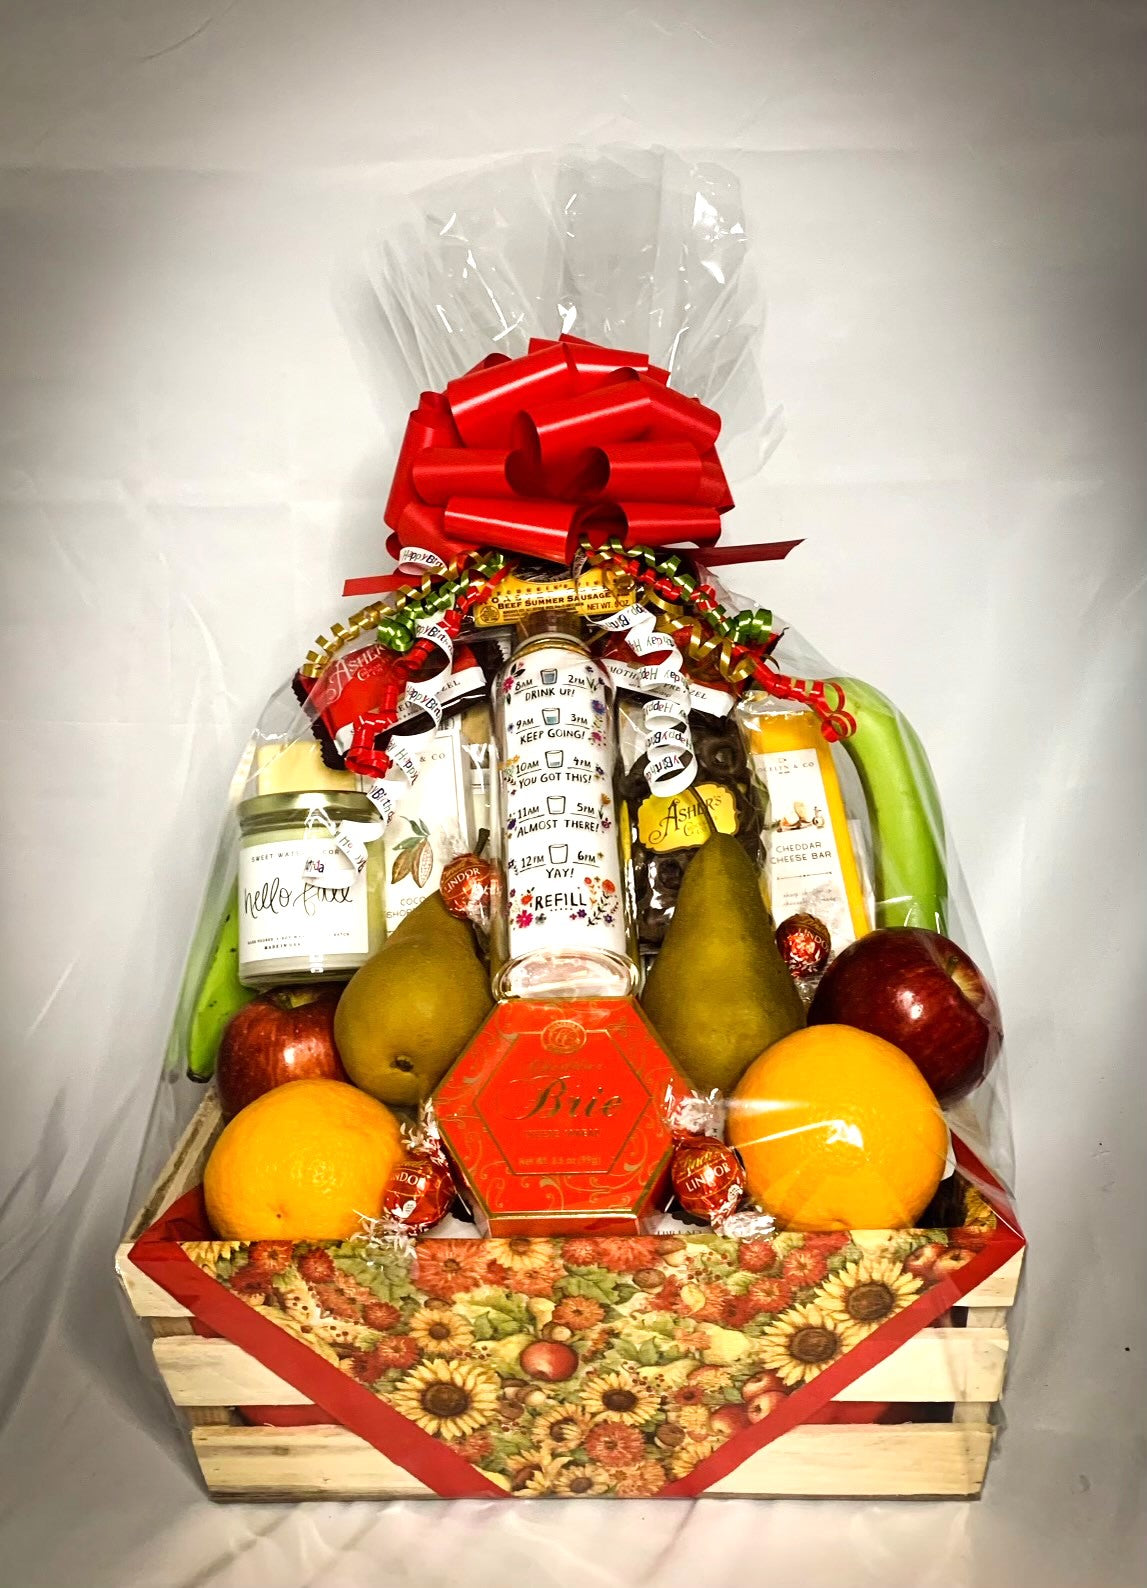 Custom Fruit Cheese and More - $115.00